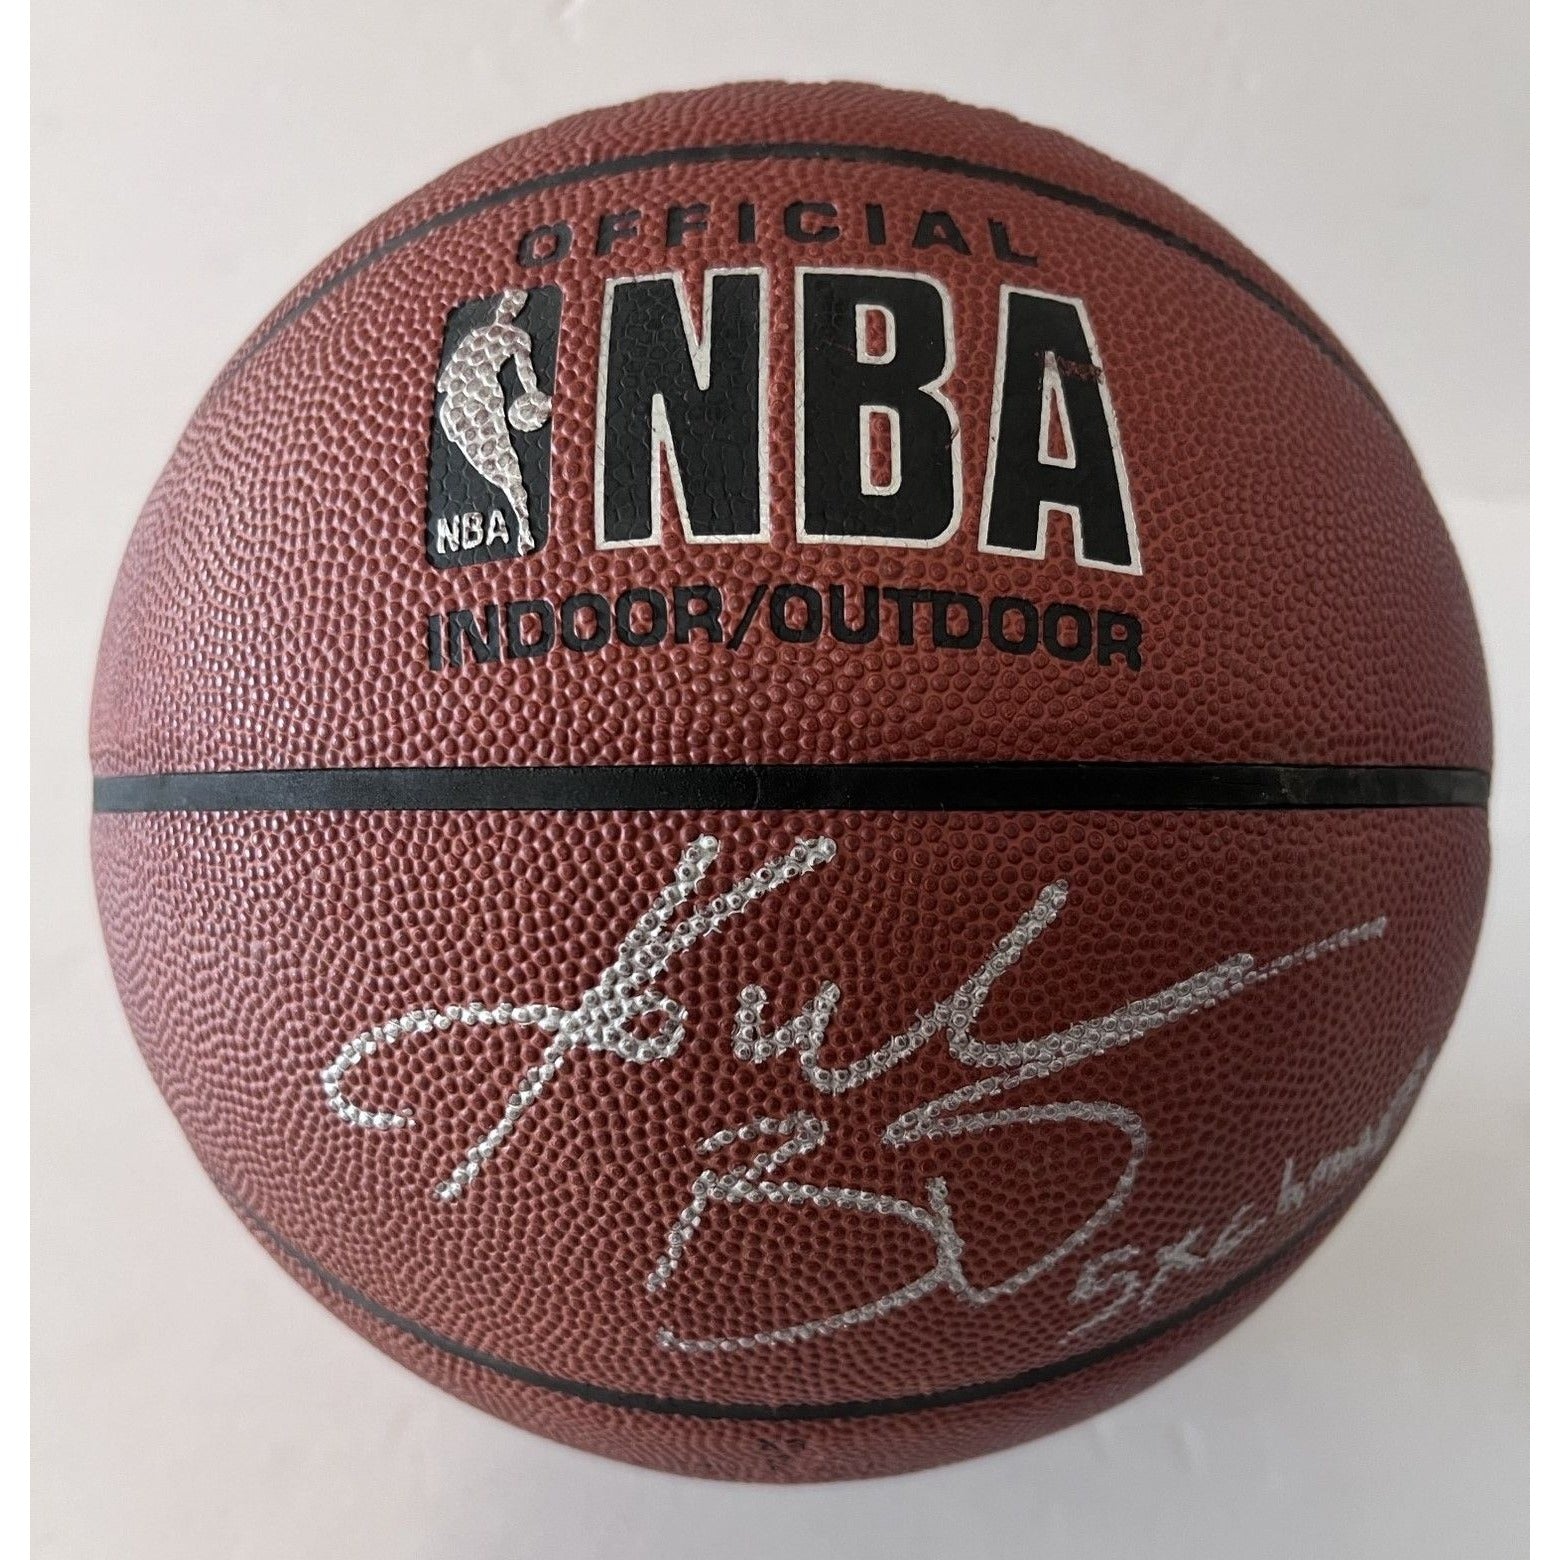 Kobe Bryant Los Angeles Lakers signed and inscribed "5 x champ" Spalding NBA basketball signed with proof